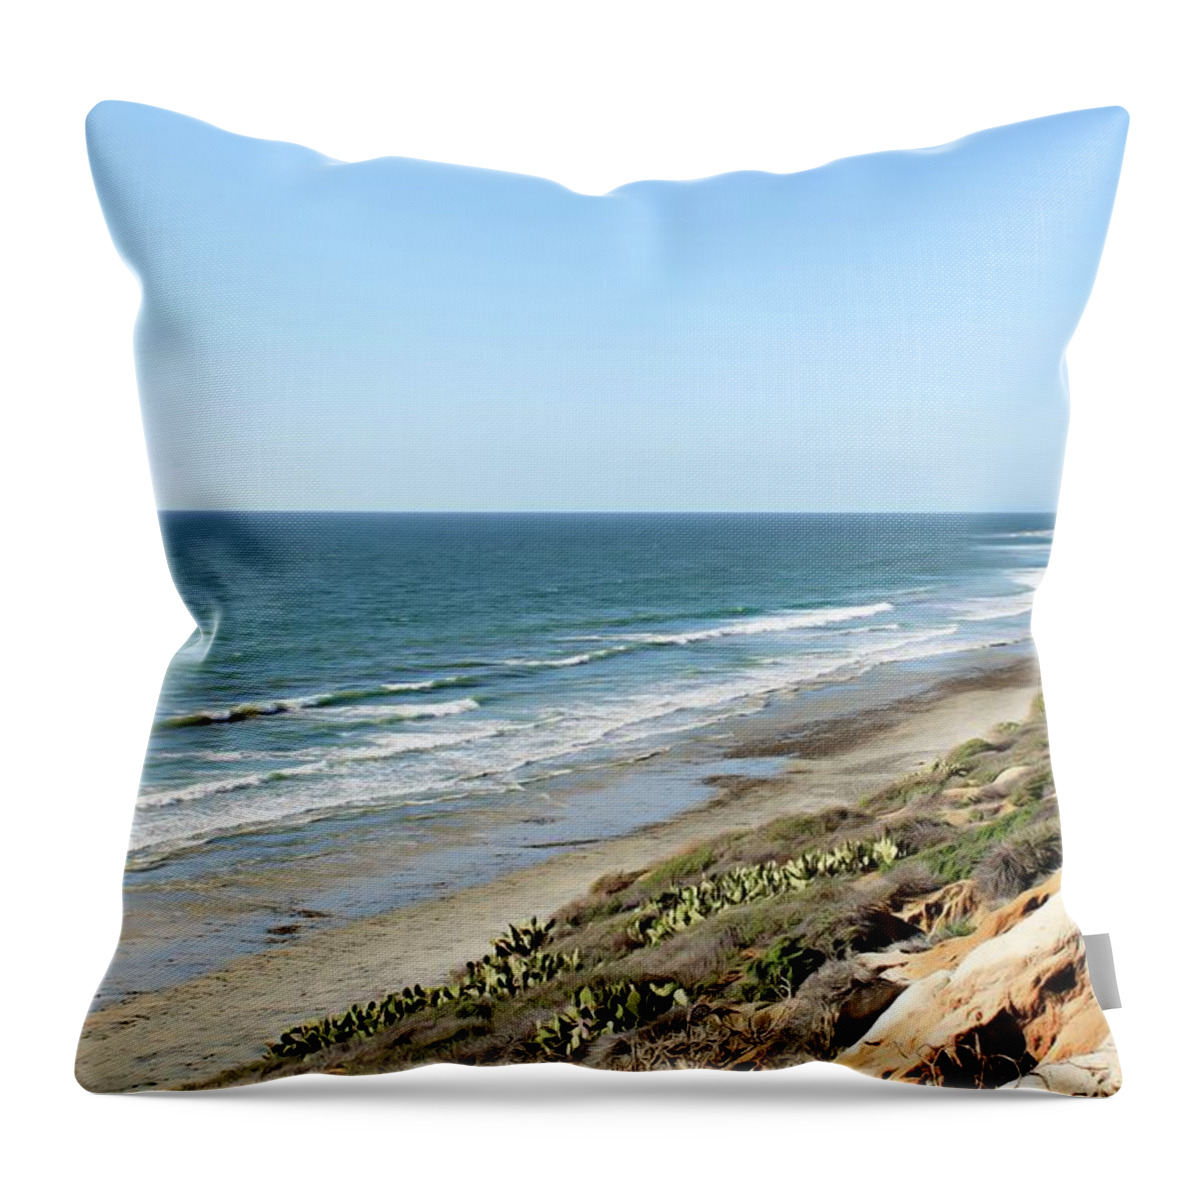 Ocean Throw Pillow featuring the photograph Ocean View by Alison Frank